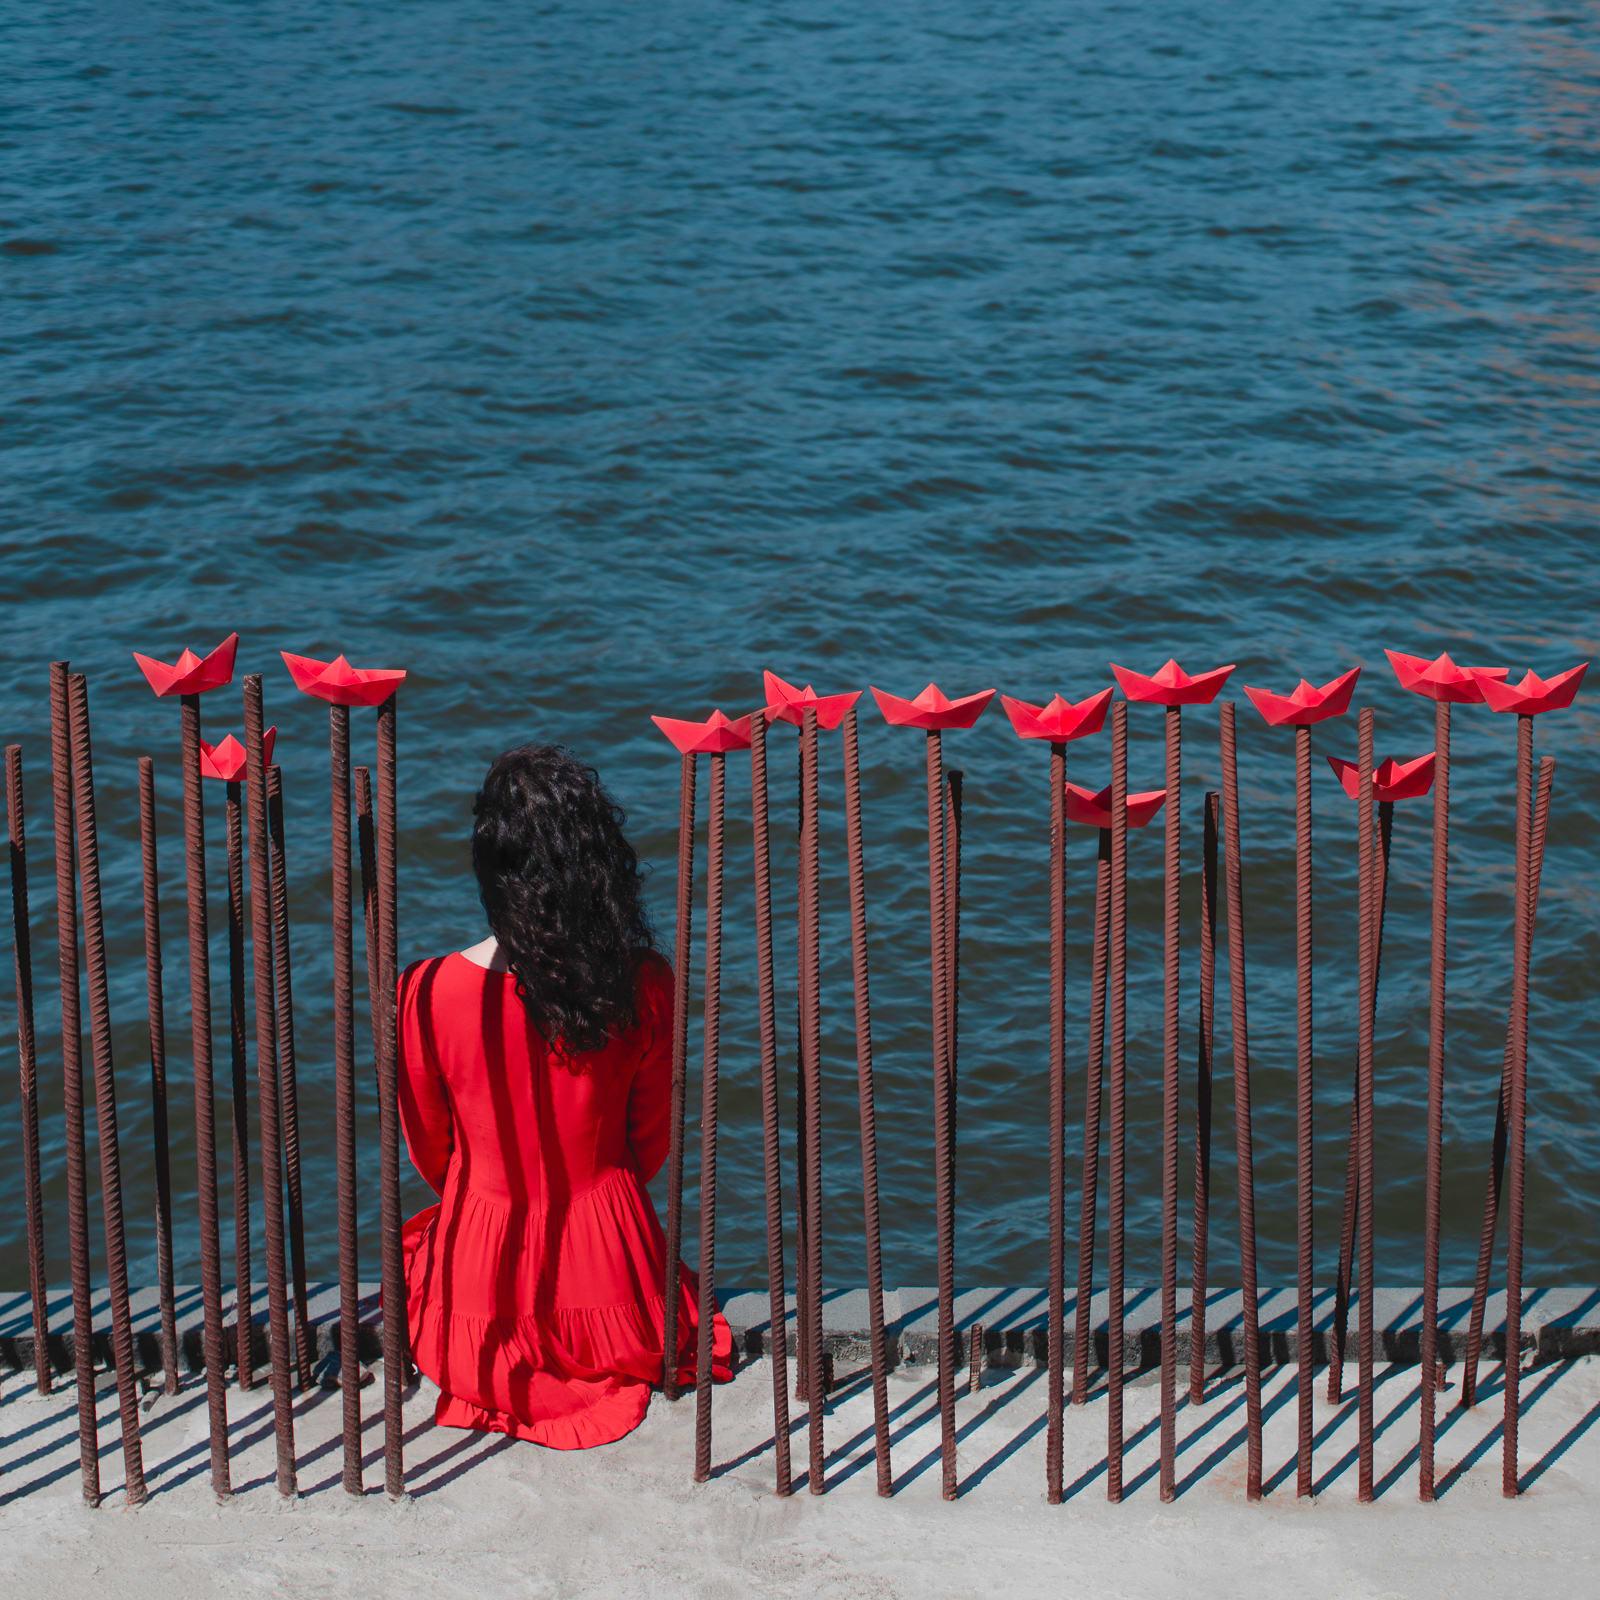 This beautifully vibrant landscape features the back of a woman in red, gazing out at the blue ocean. Little red origami boats adorn posts around her. Will she sail away? This is a limited edition color photograph. Number 1 of 5 is currently